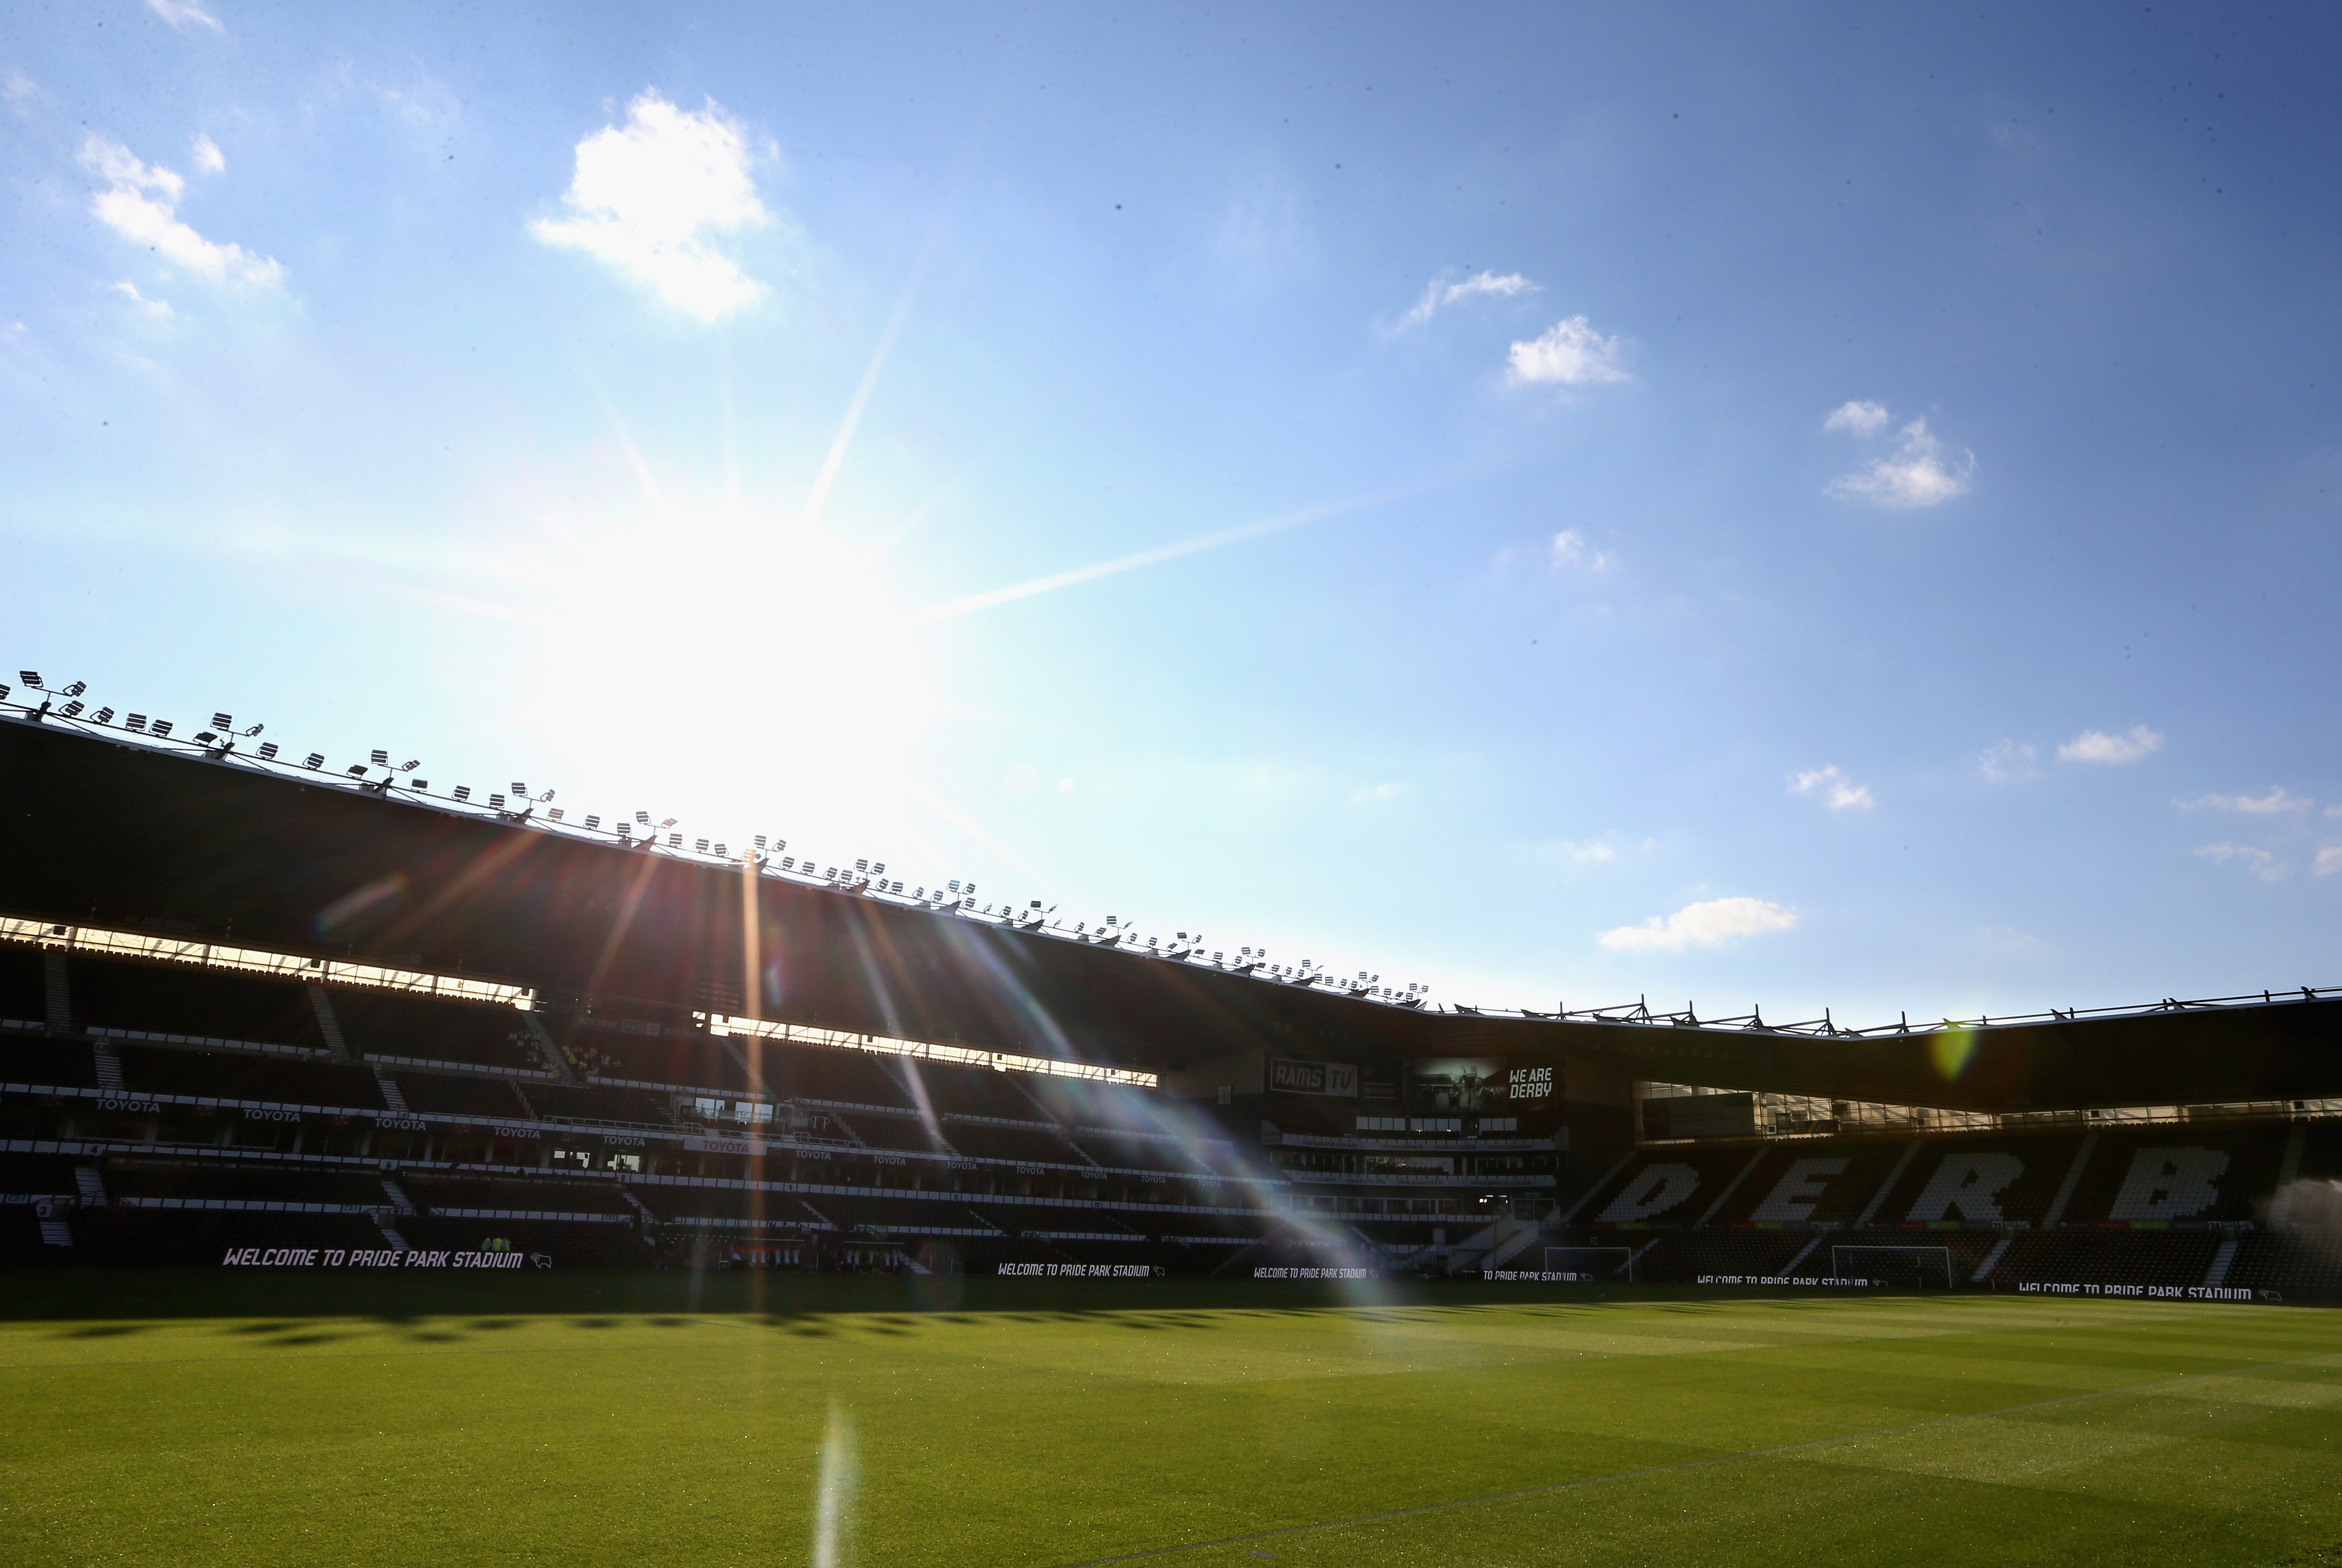 DERBY, ENGLAND - AUGUST 21:  A general view from inside the stadium prior to the Sky Bet Championship match between Derby County and Ipswich Town at Pride Park Stadium on August 21, 2018 in Derby, England.  (Photo by Alex Pantling/Getty Images)